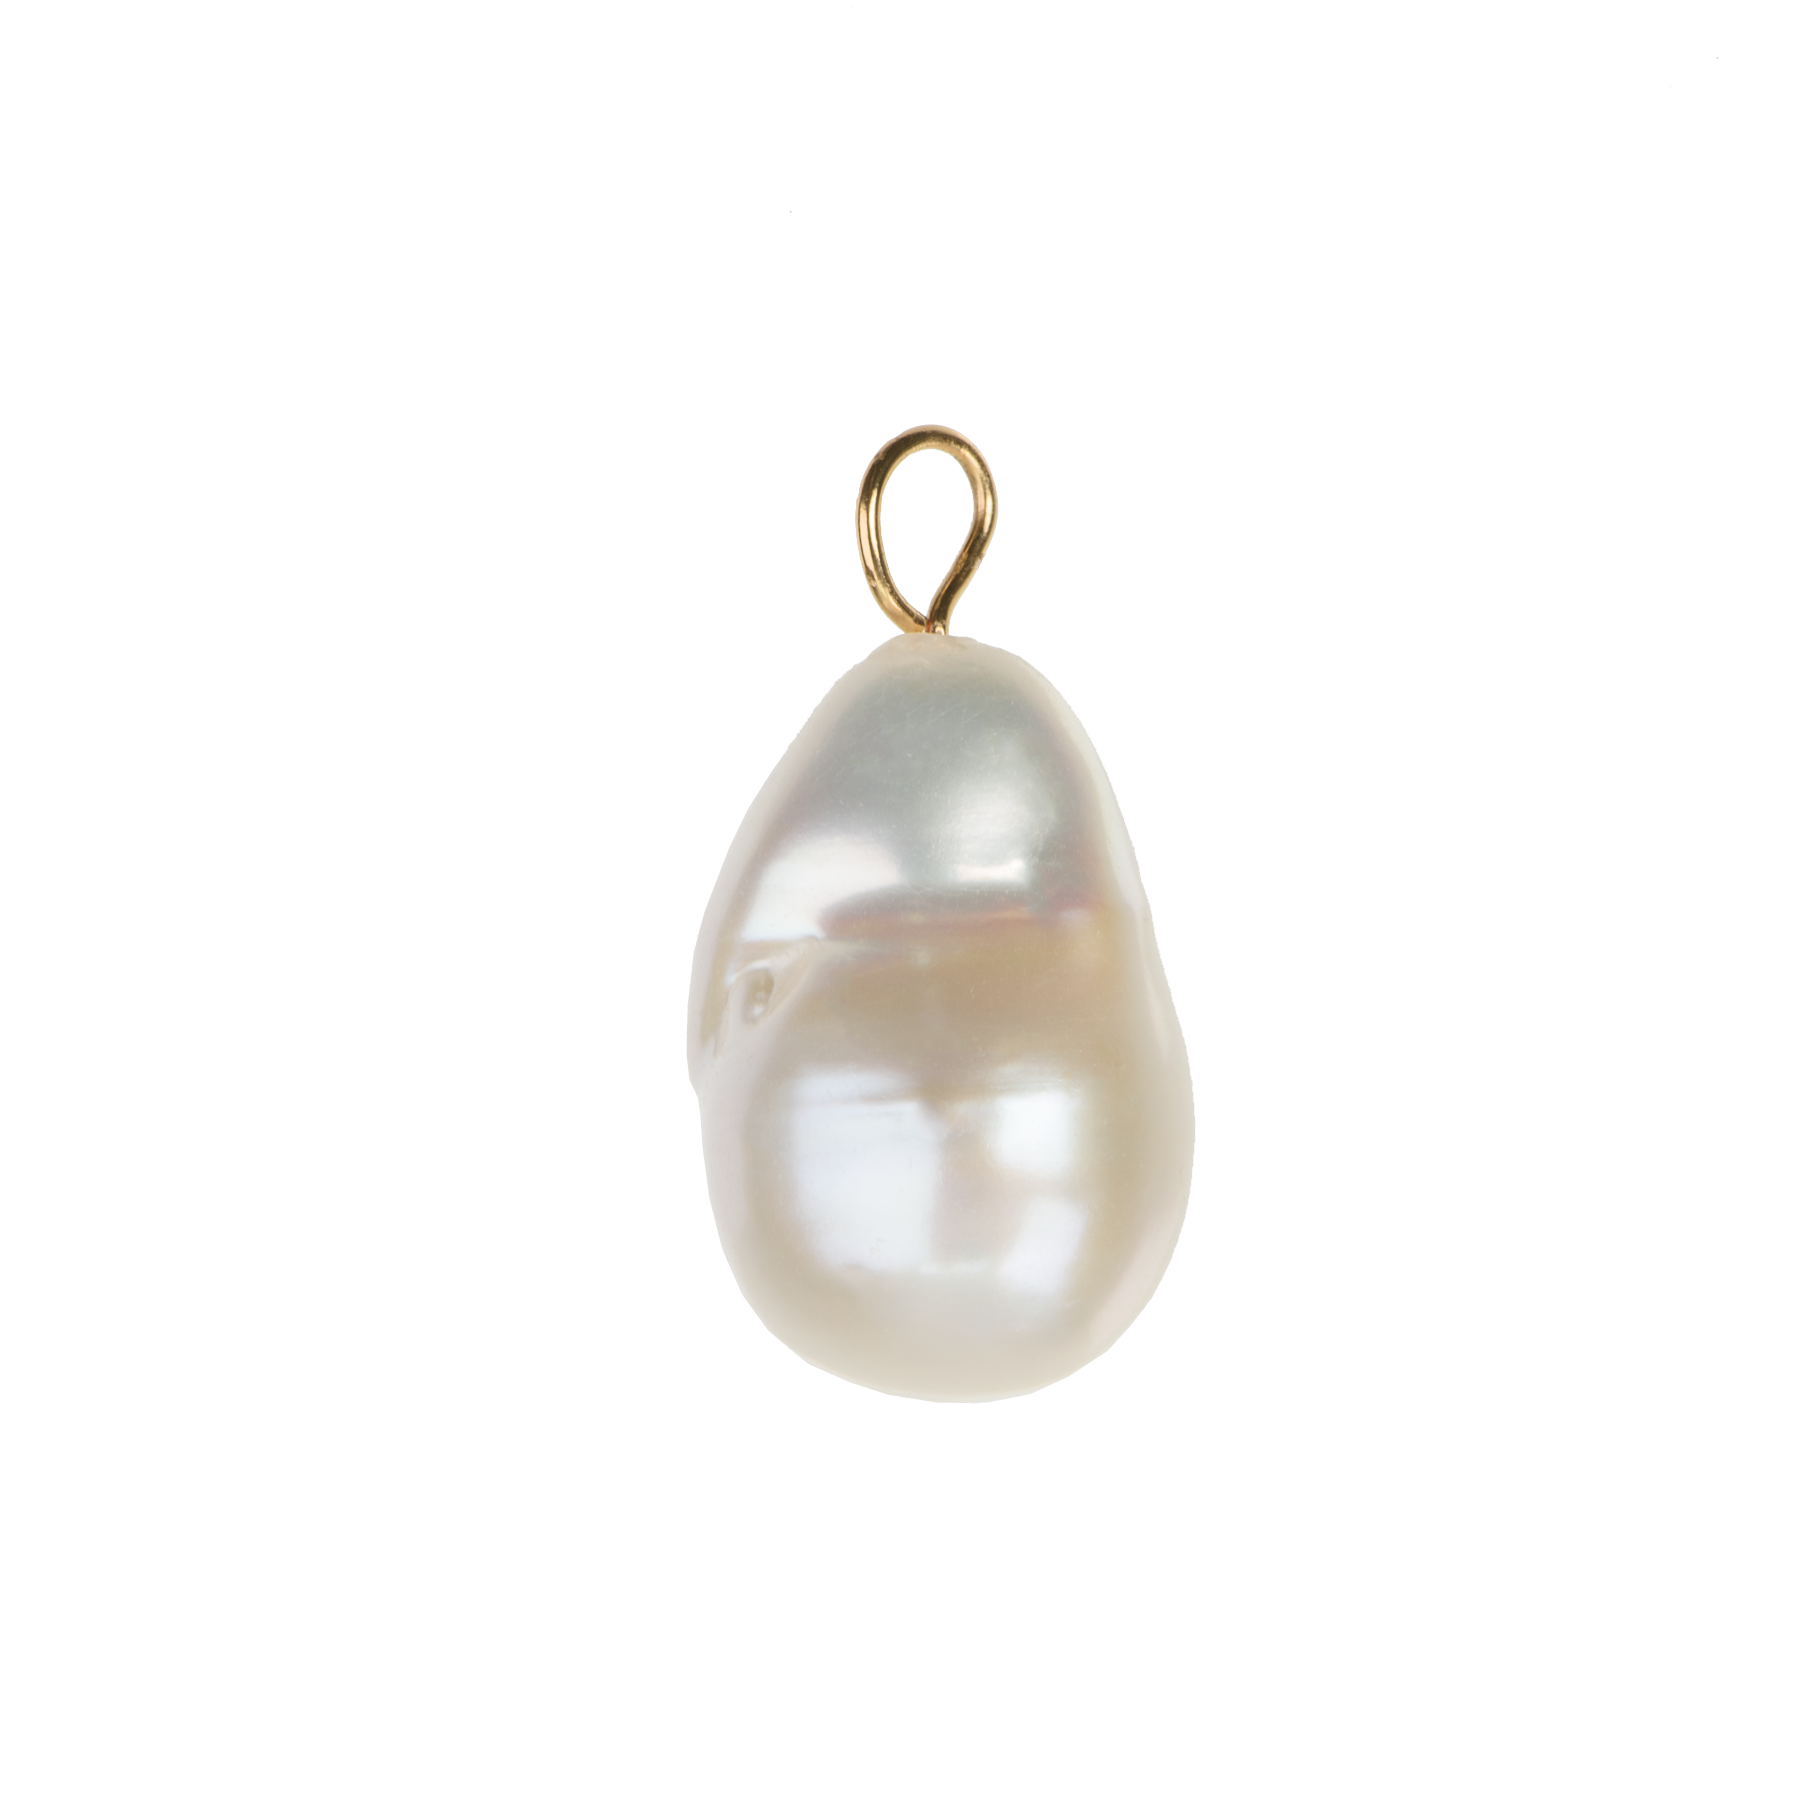 Image of Baroque pearl from Emilia by Bon Dep